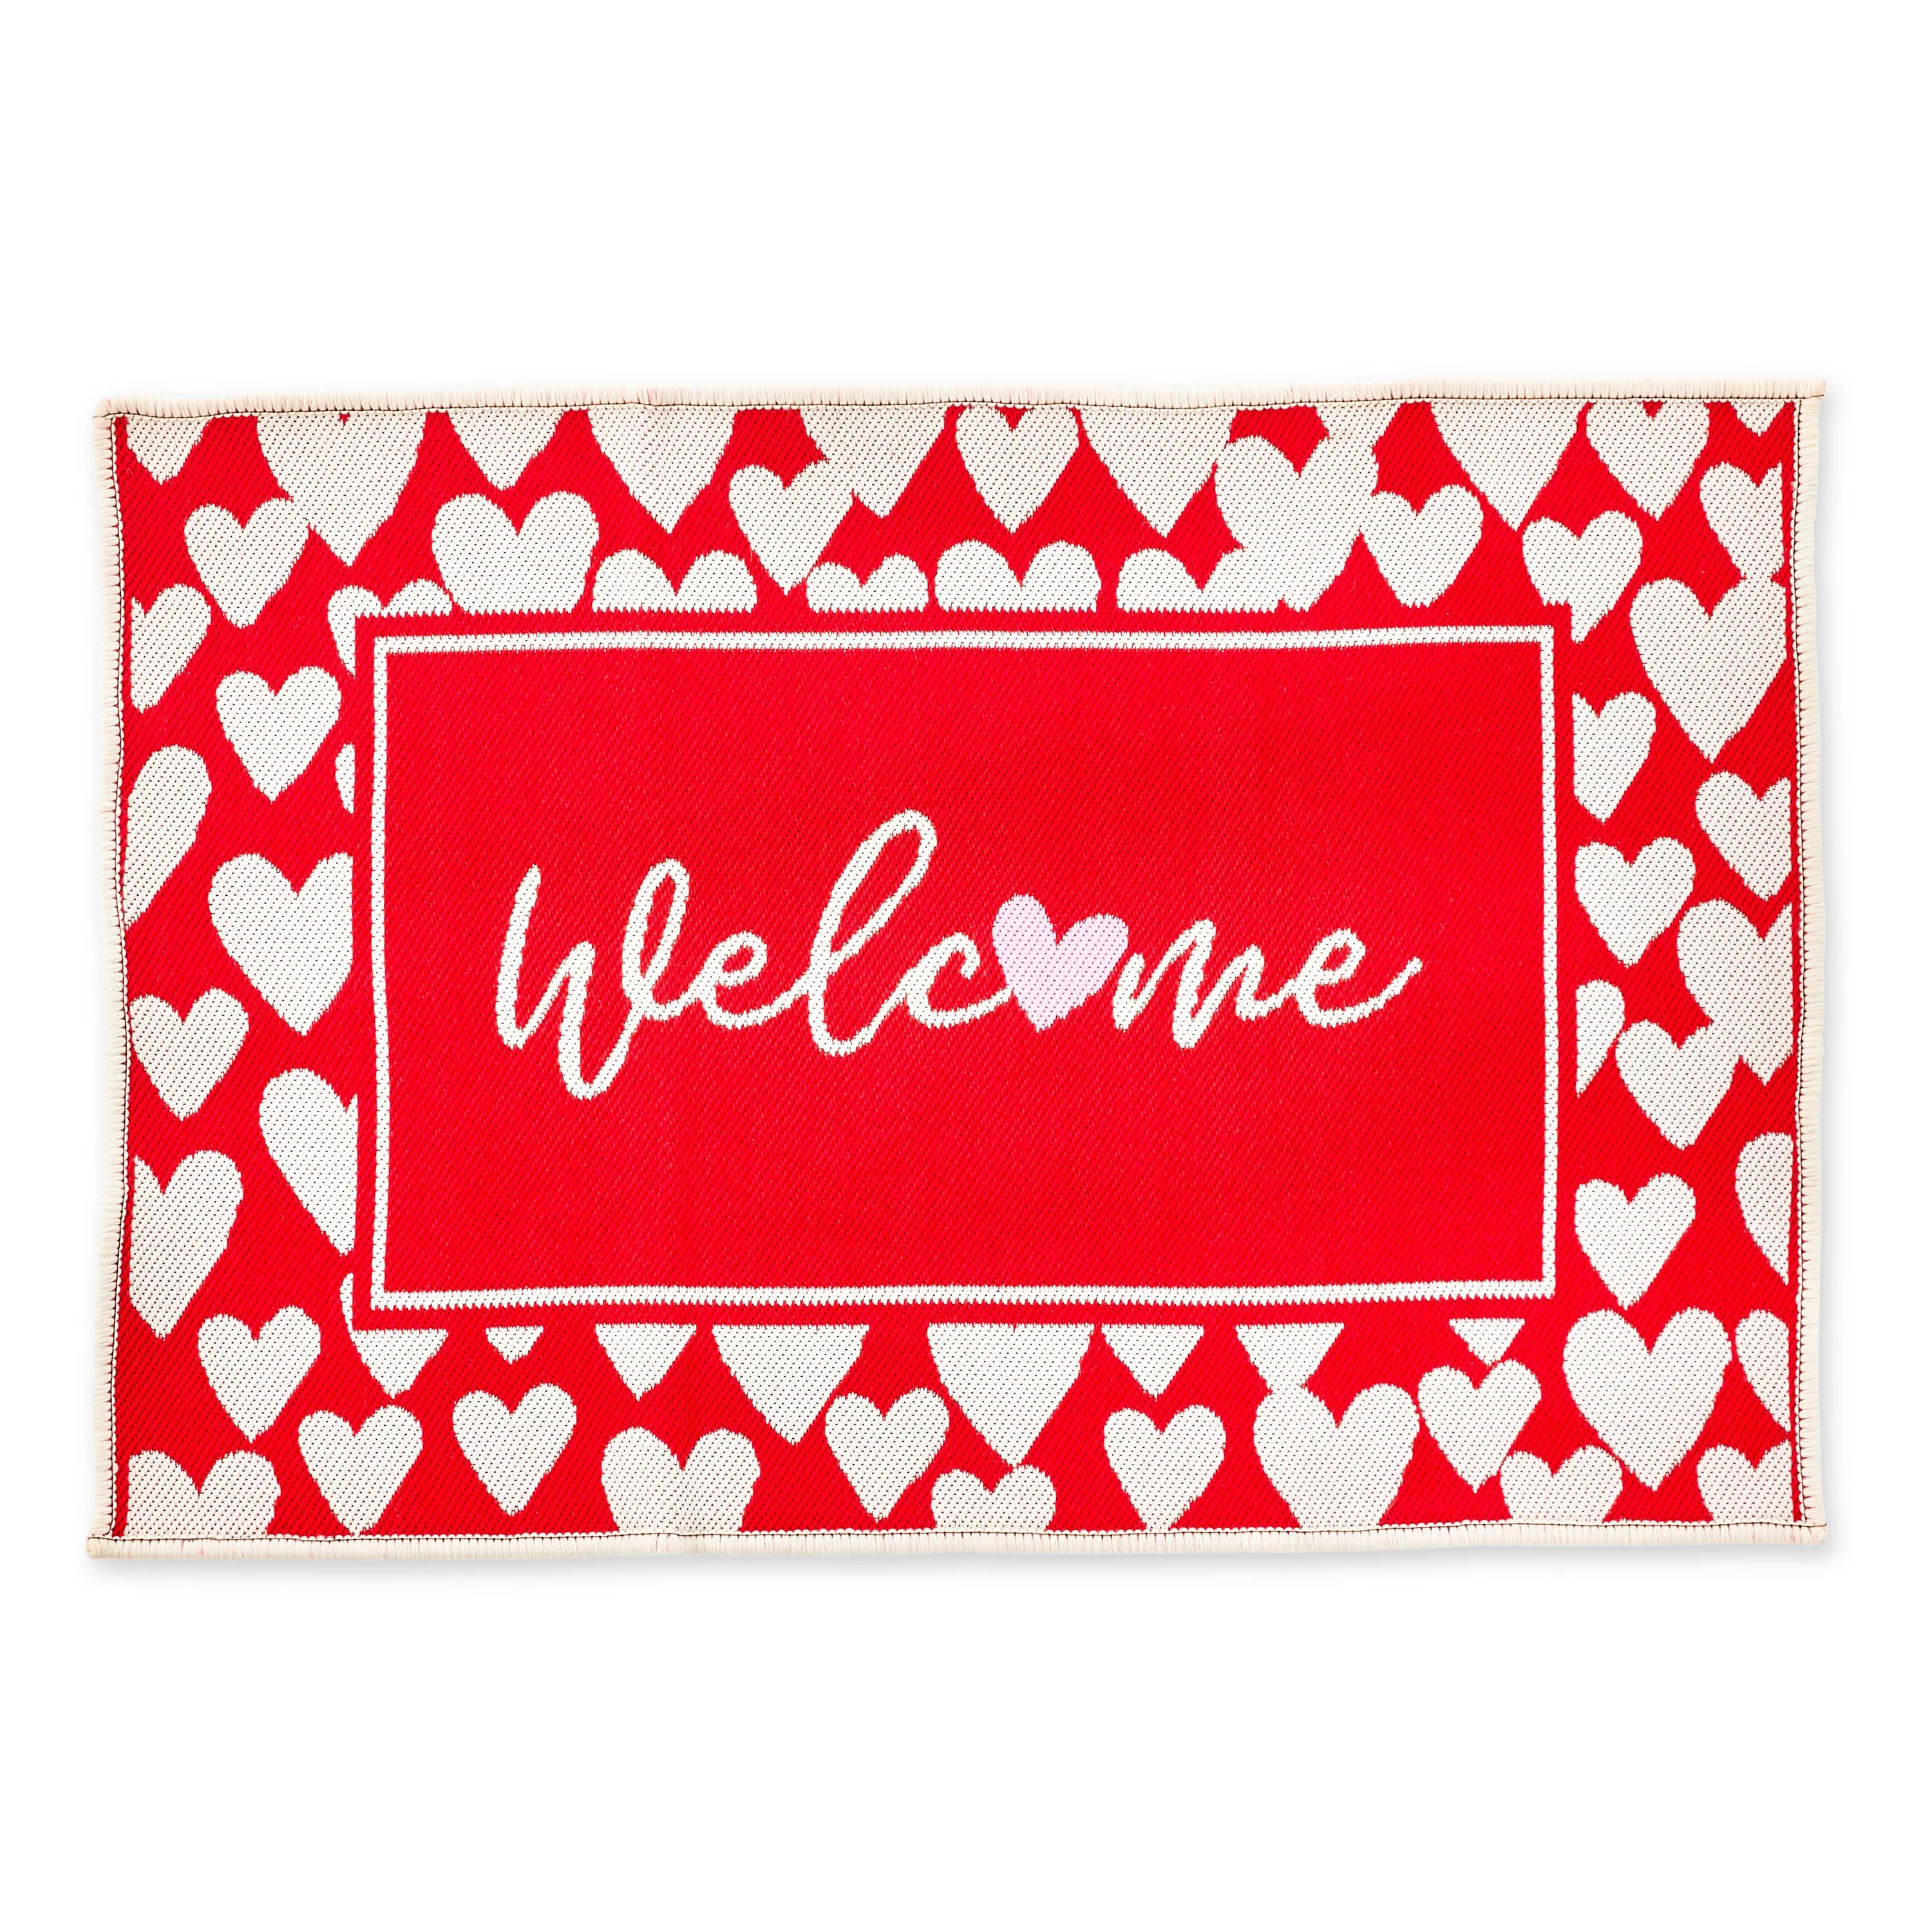 Way To Celebrate! Reversible Welcome Rugs, Multi Color, 36in x 24in - Walmart.com | Walmart (US)